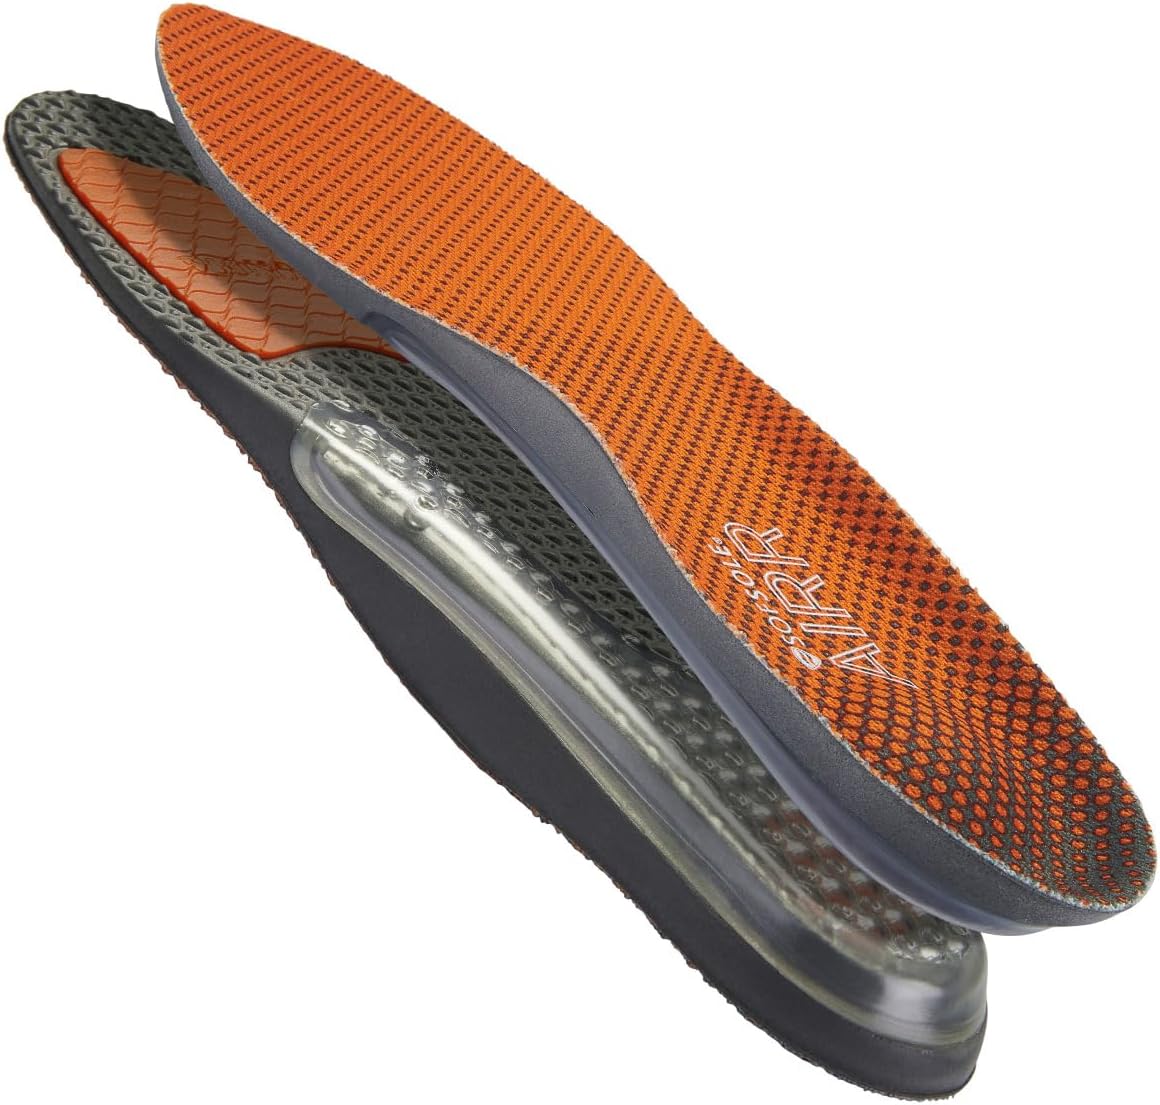 Best Insoles for Police Boots  -Sof Sole mens Airr Performance Full-length Insole